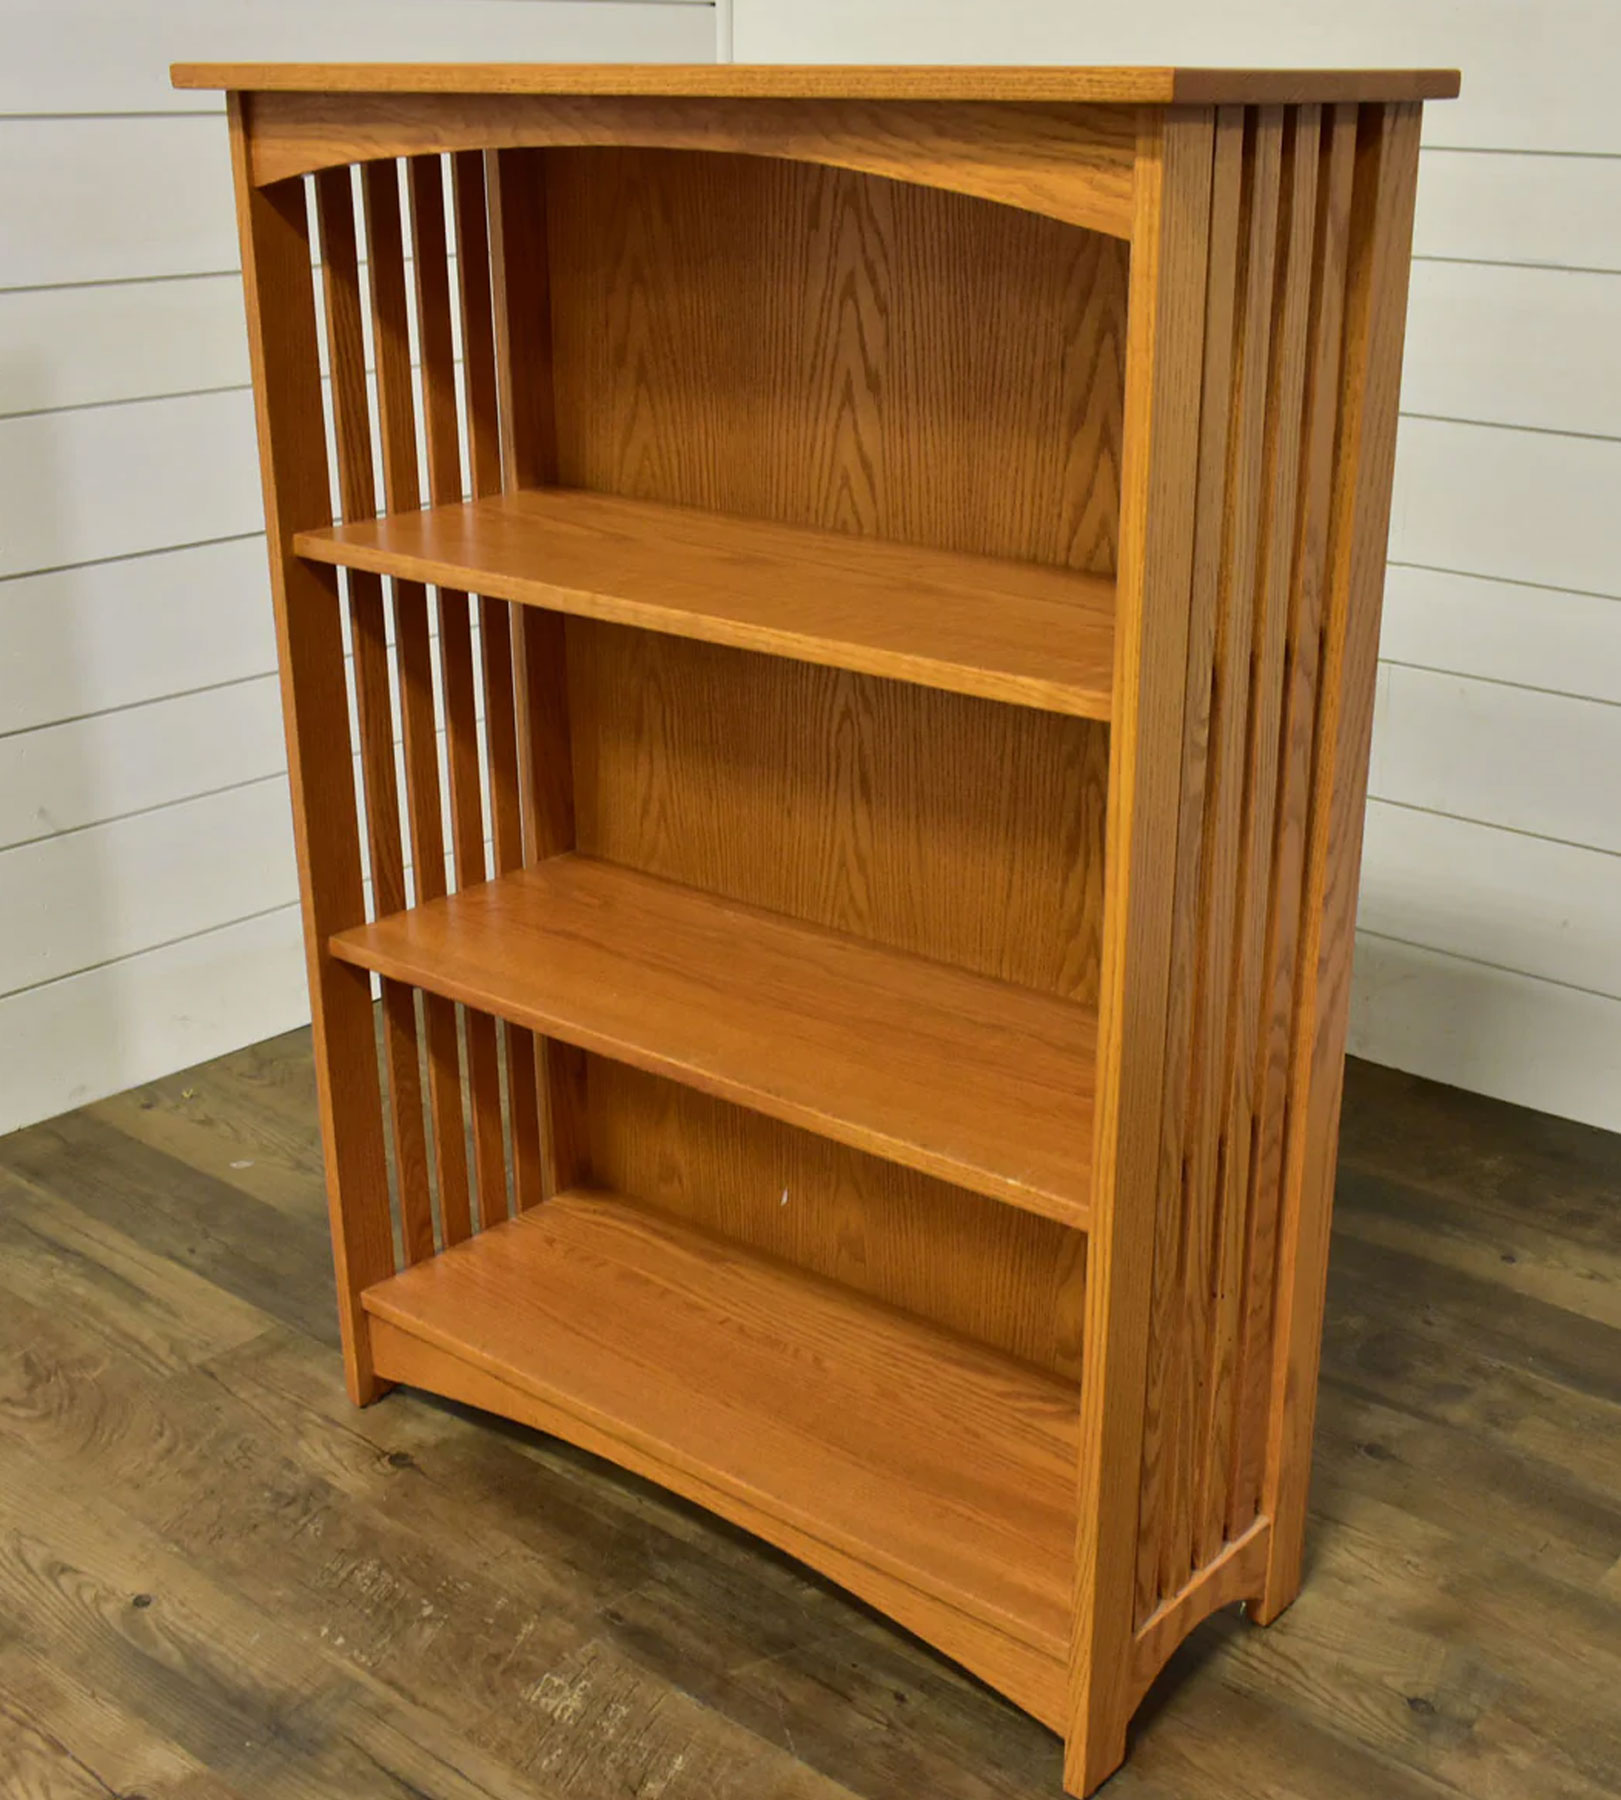 Slatted Mission Bookcase in Red Oak